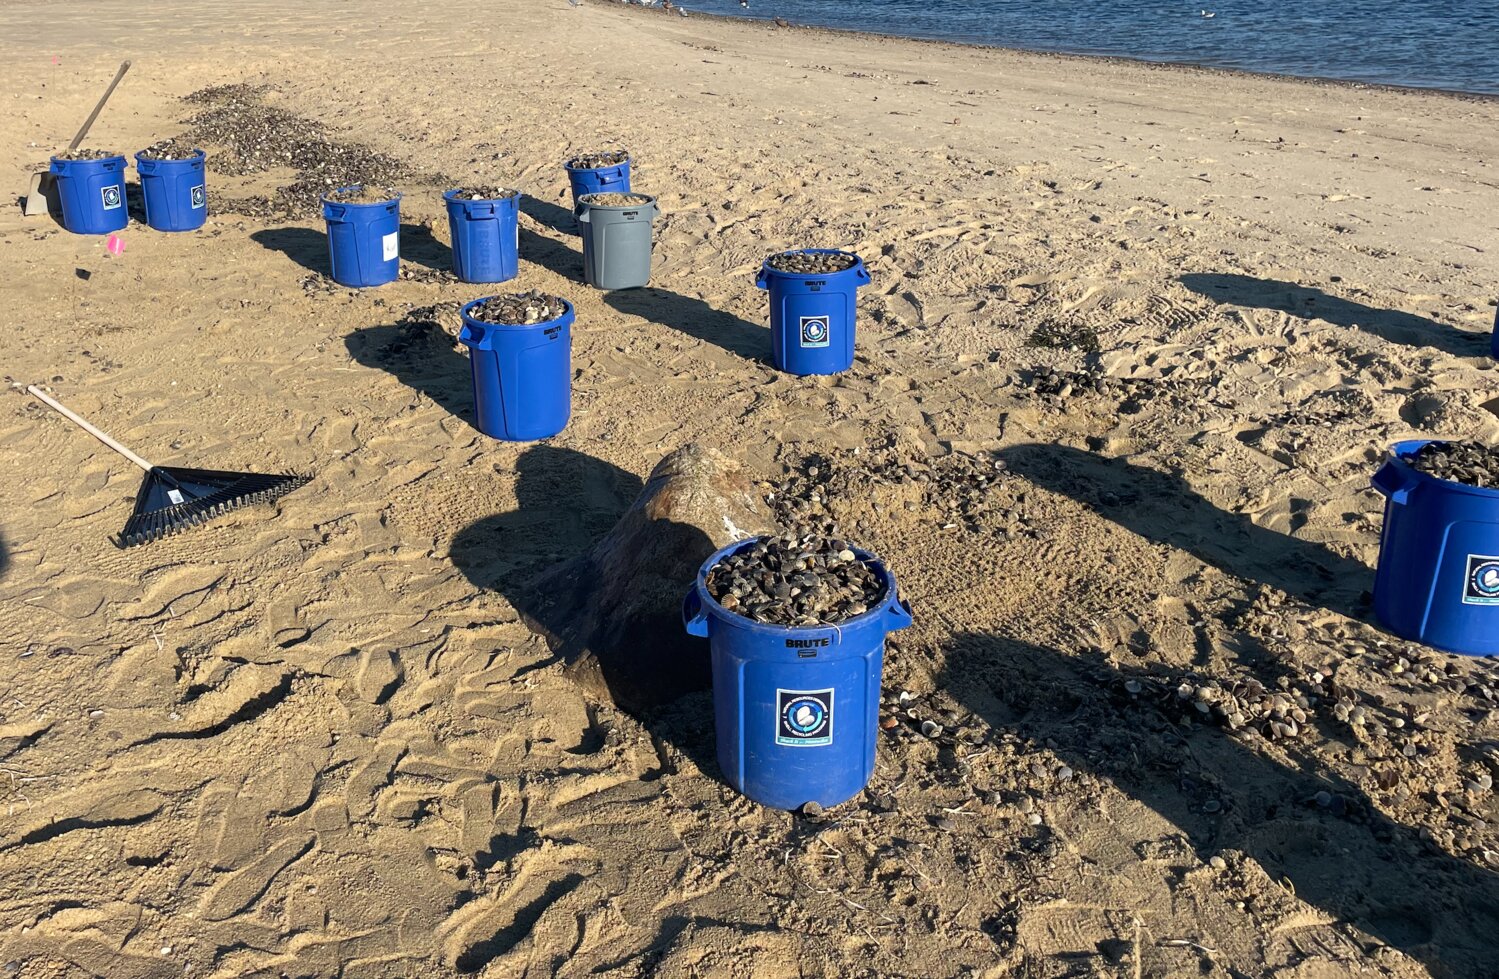 Buckets of scallop seed set to be returned to Nantucket Harbor.